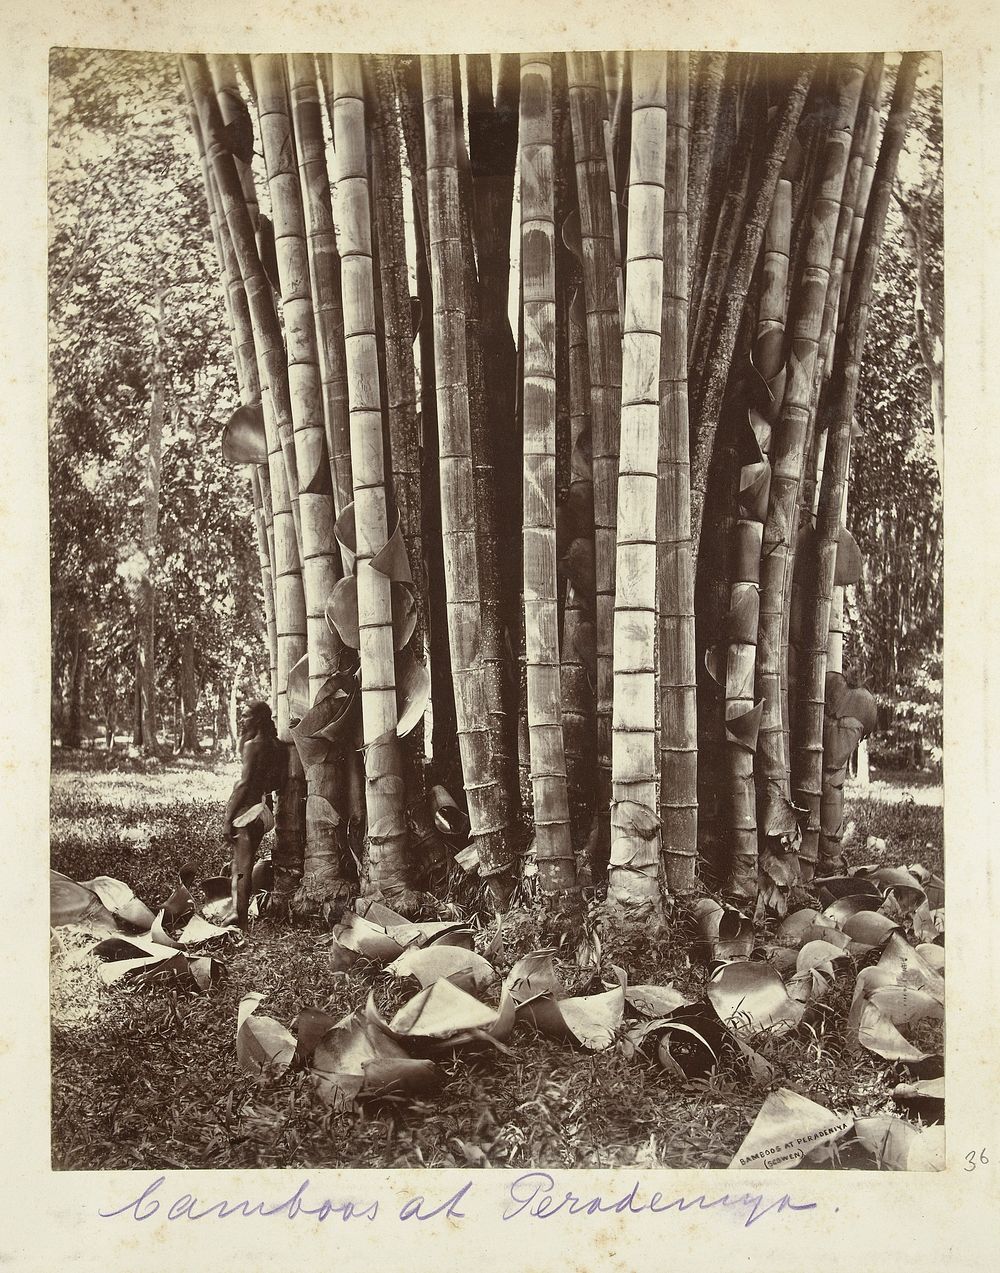 Bamboebos in de botanische tuin van Kandy (c. 1890 - c. 1910) by Charles T Scowen and anonymous